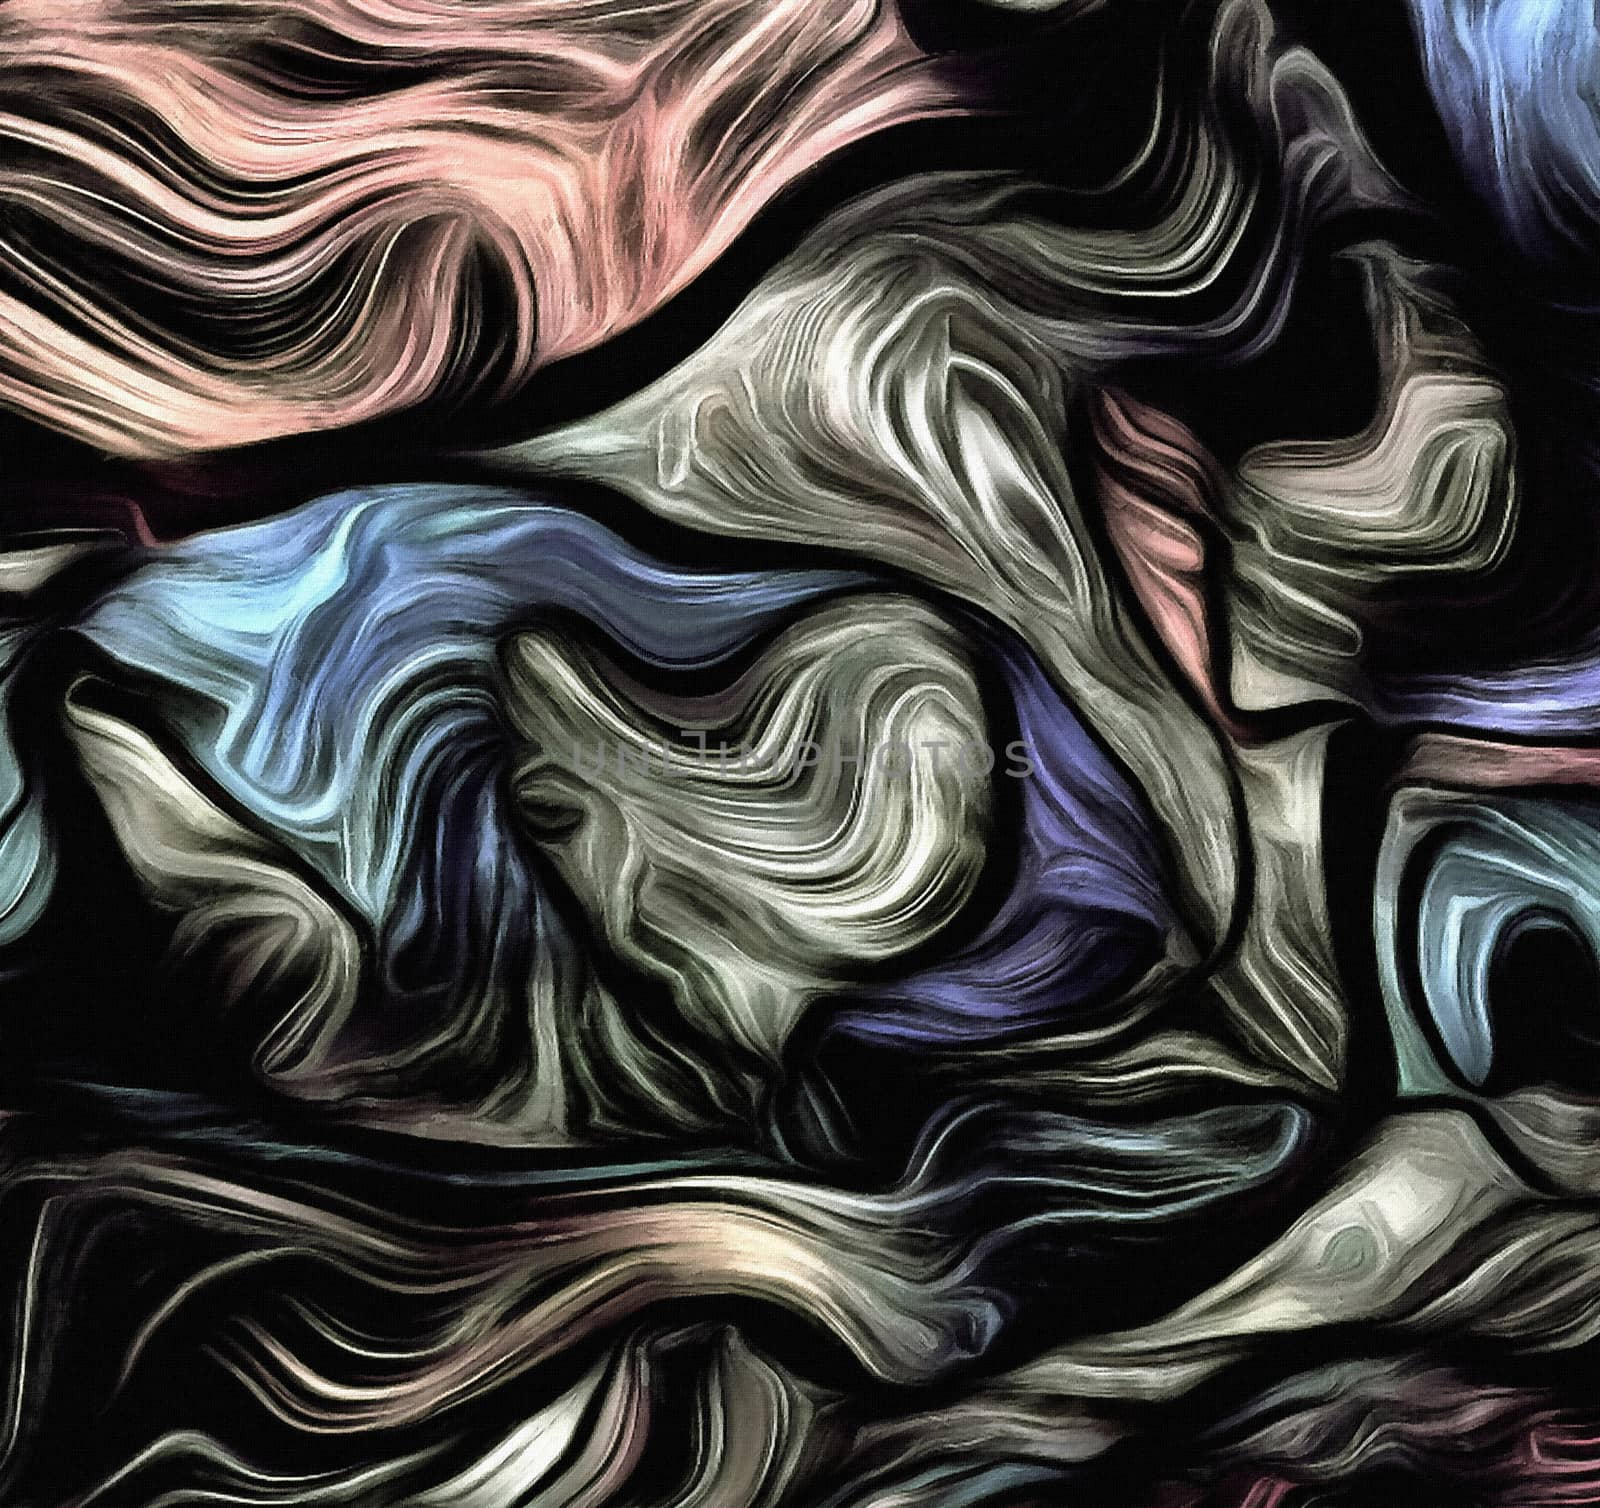 Fluid lines of color movement. Dull colors. 3D rendering